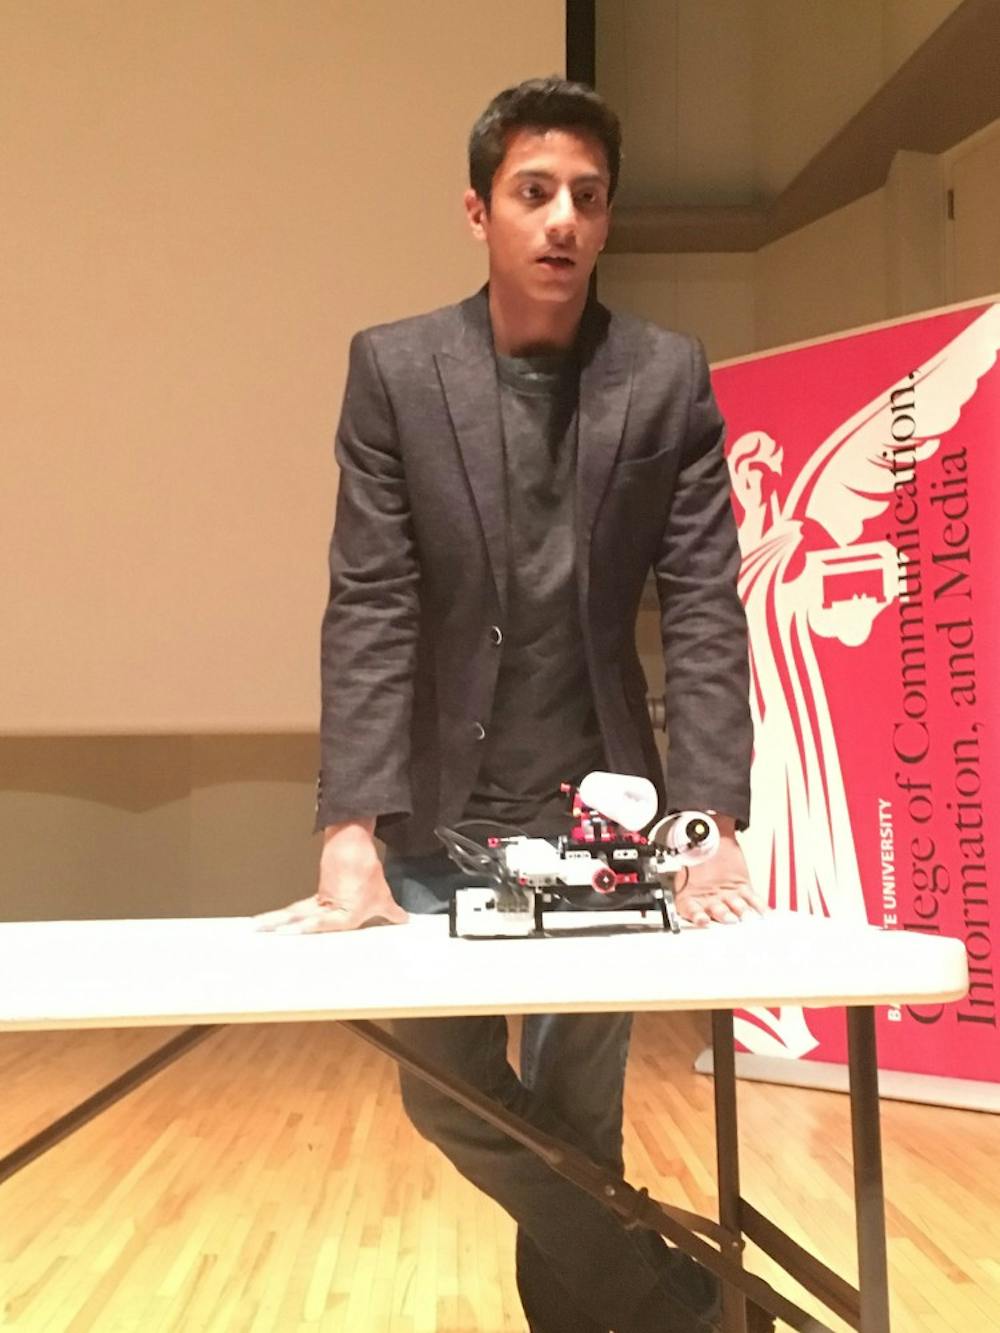 Shubham Banerjee, a 14-year-old entrepreneur, spoke at Ball State on March 30. DN PHOTO MICHELLE KAUFMAN